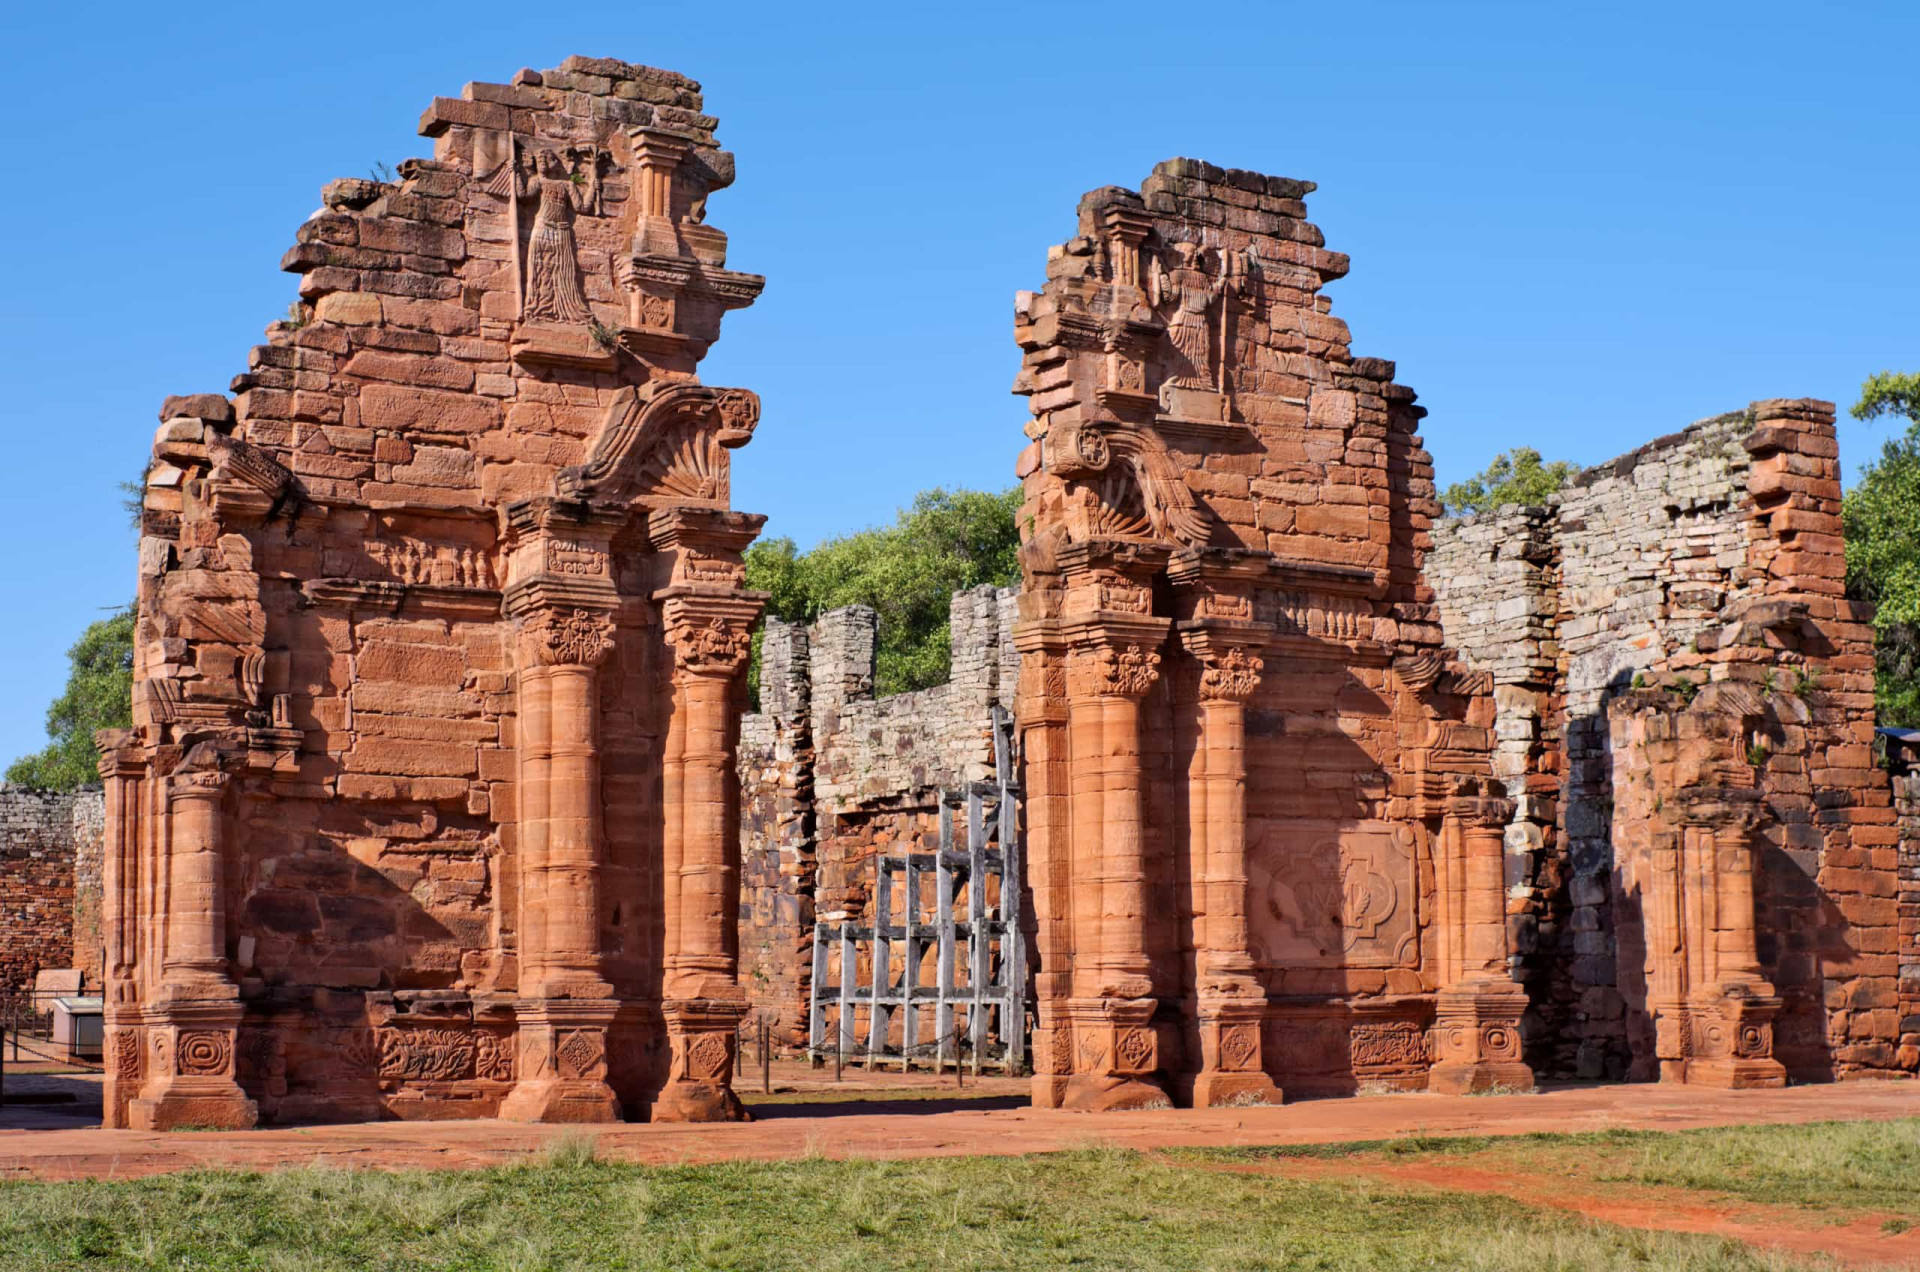 <p>Locations: Misiones Province (Argentina), Rio Grande do Sul (Brazil)<br>Criteria: Cultural<br>Year established: 1983<br>Description: San Ignacio Mini (pictured) Santa Ana, Nuestra Señora de Loreto, and Santa María Mayor in Argentina and the ruins of São Miguel das Missões in Brazil are set in a tropical forest in the land of the Guarani people.</p><p>You may also like:<a href="https://www.starsinsider.com/n/366429?utm_source=msn.com&utm_medium=display&utm_campaign=referral_description&utm_content=413555v12en-us"> Celebrities who were poor before fame found them</a></p>